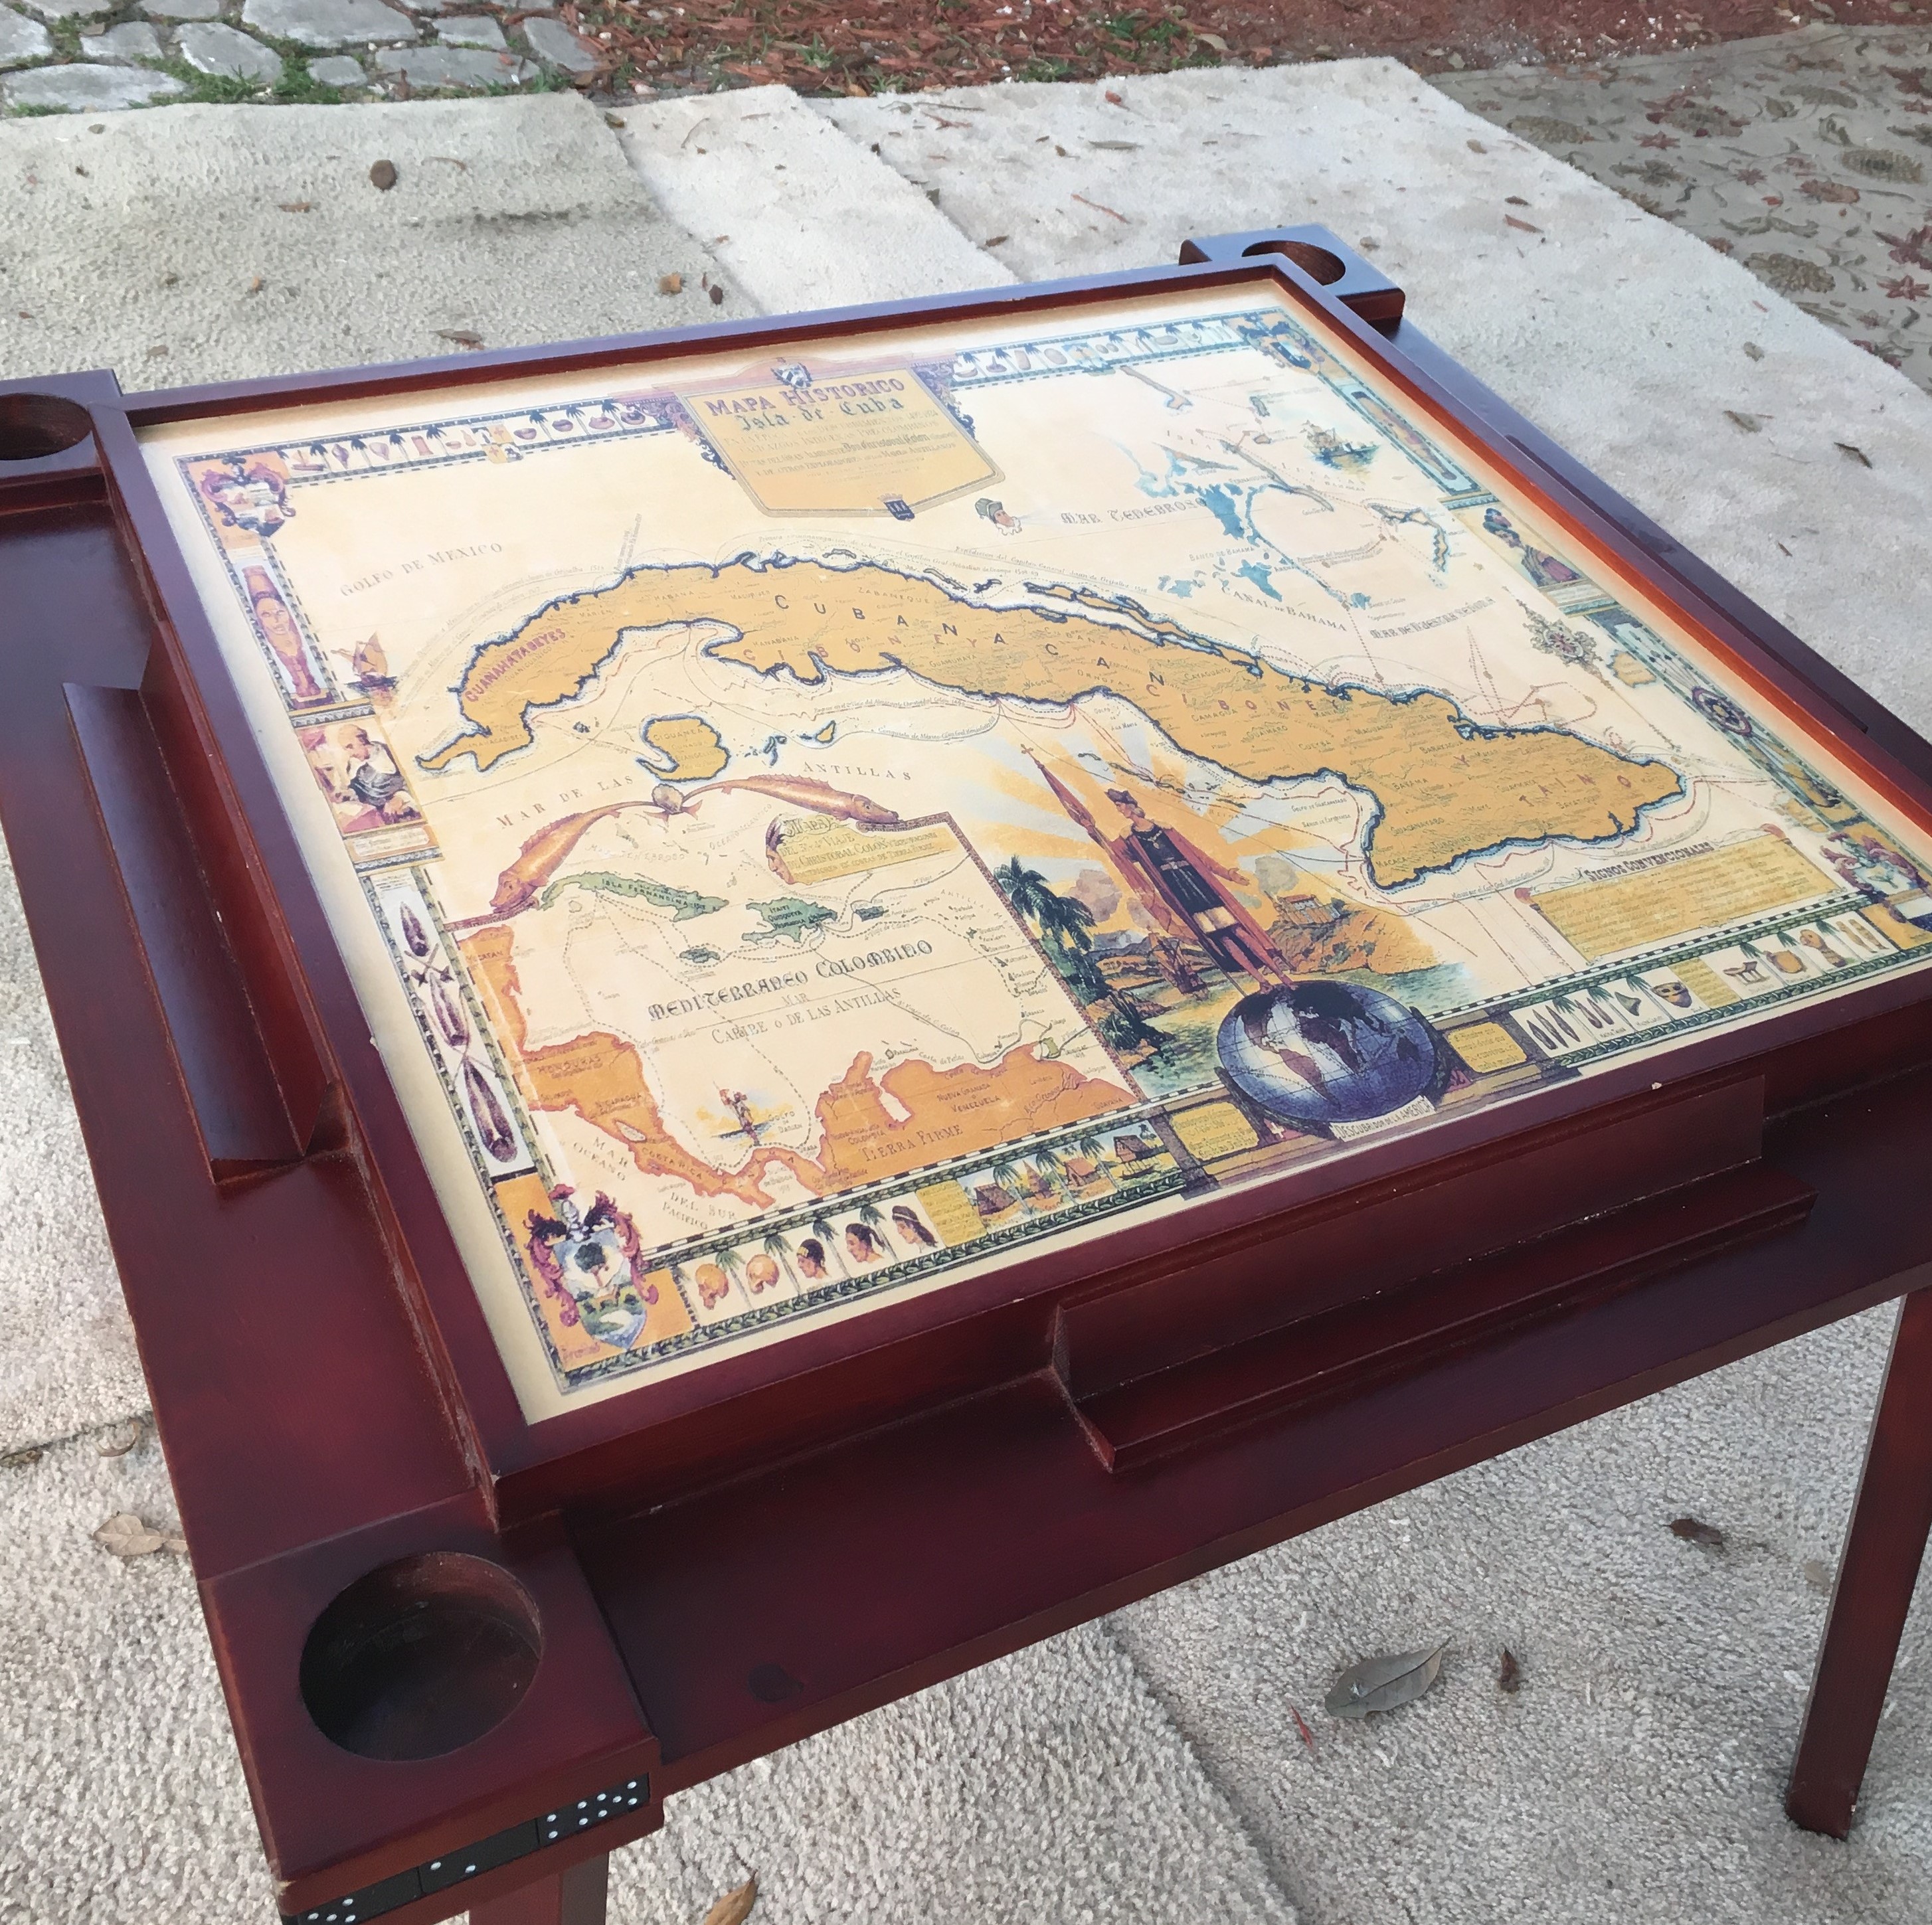  A custom-made domino table owned by Heiddy Rocha’s parents honors their homeland and one of their favorite pastimes. (Photo courtesy of Heiddy Rocha)